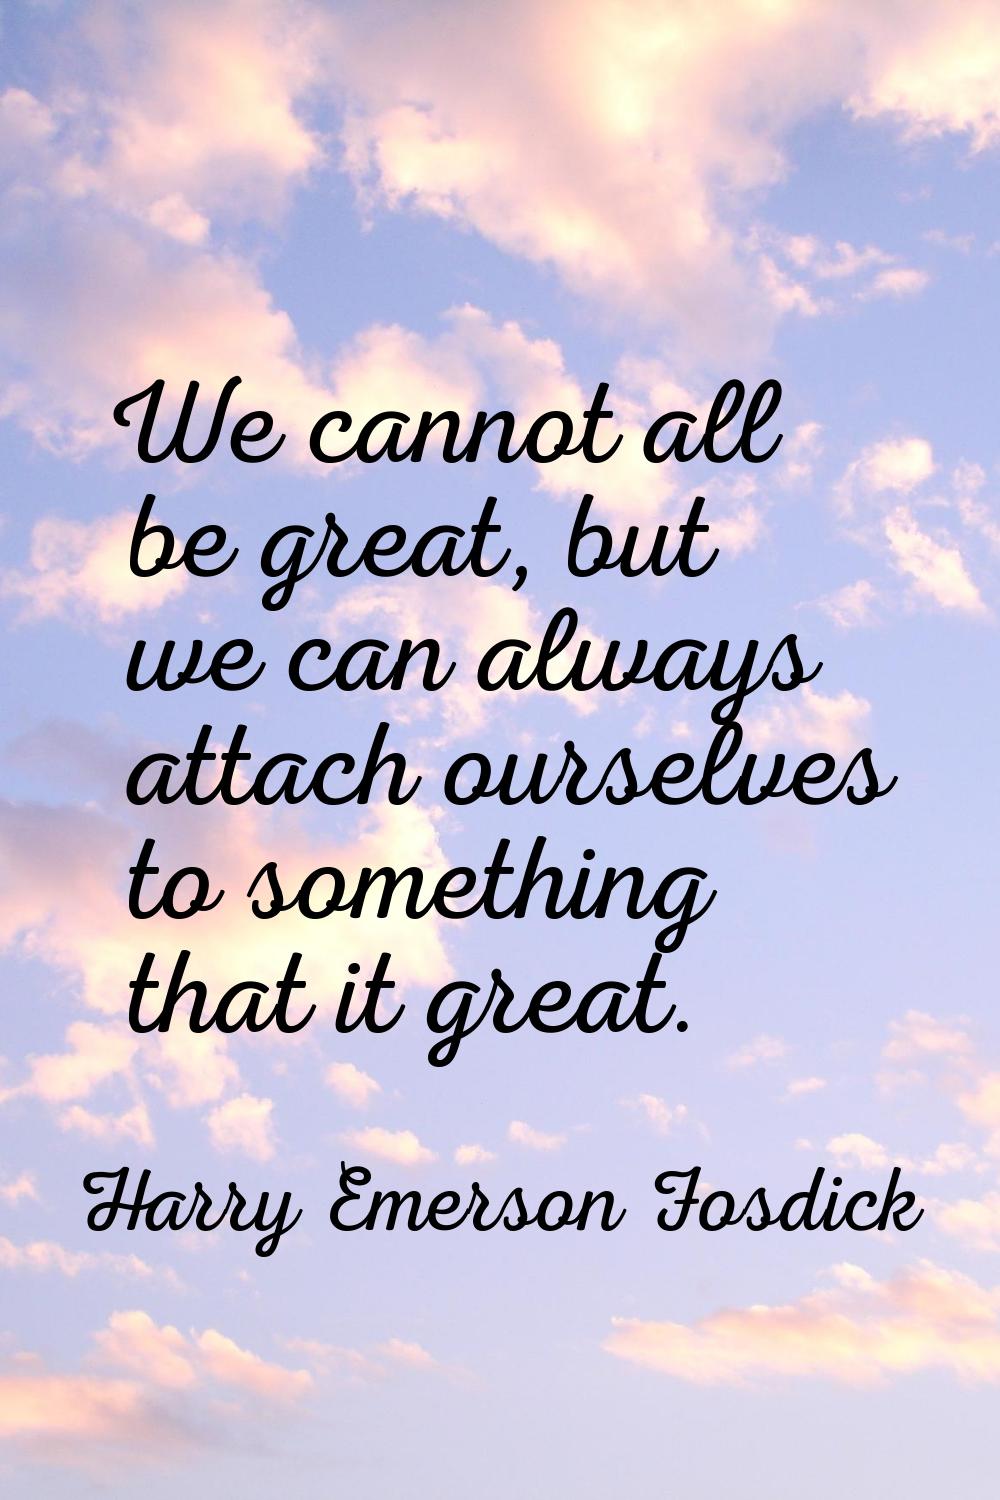 We cannot all be great, but we can always attach ourselves to something that it great.